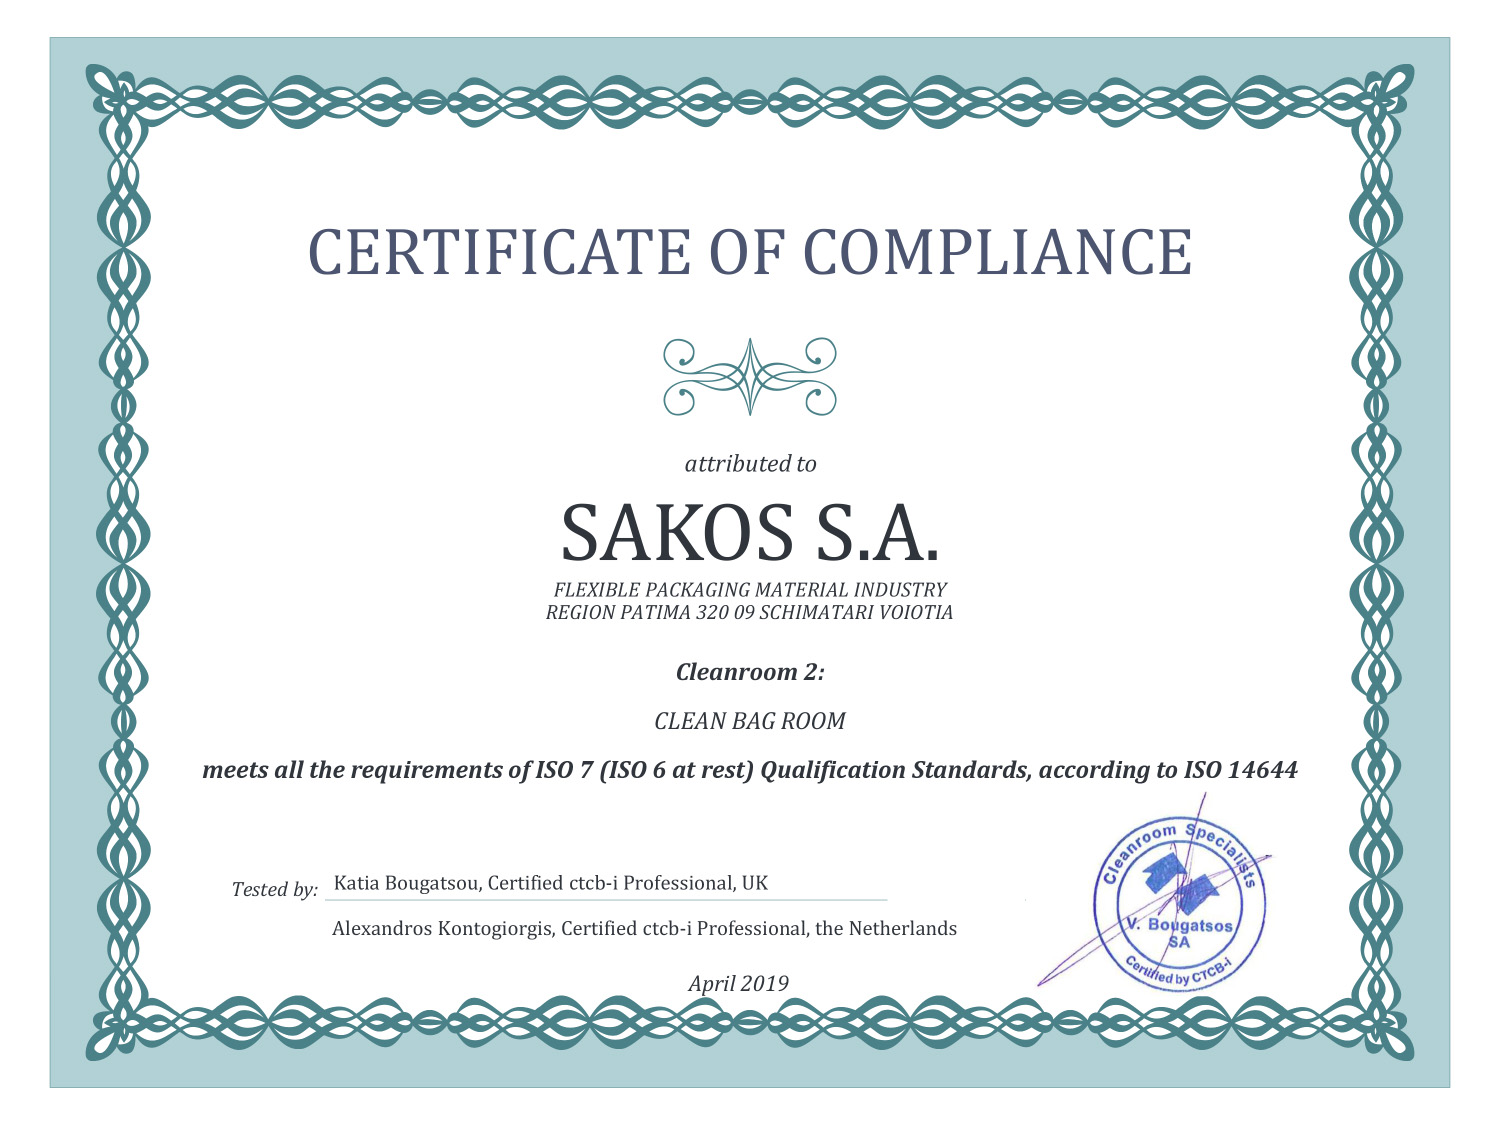 SAKOS S.A. - Production and trade of plastic flexible packaging material